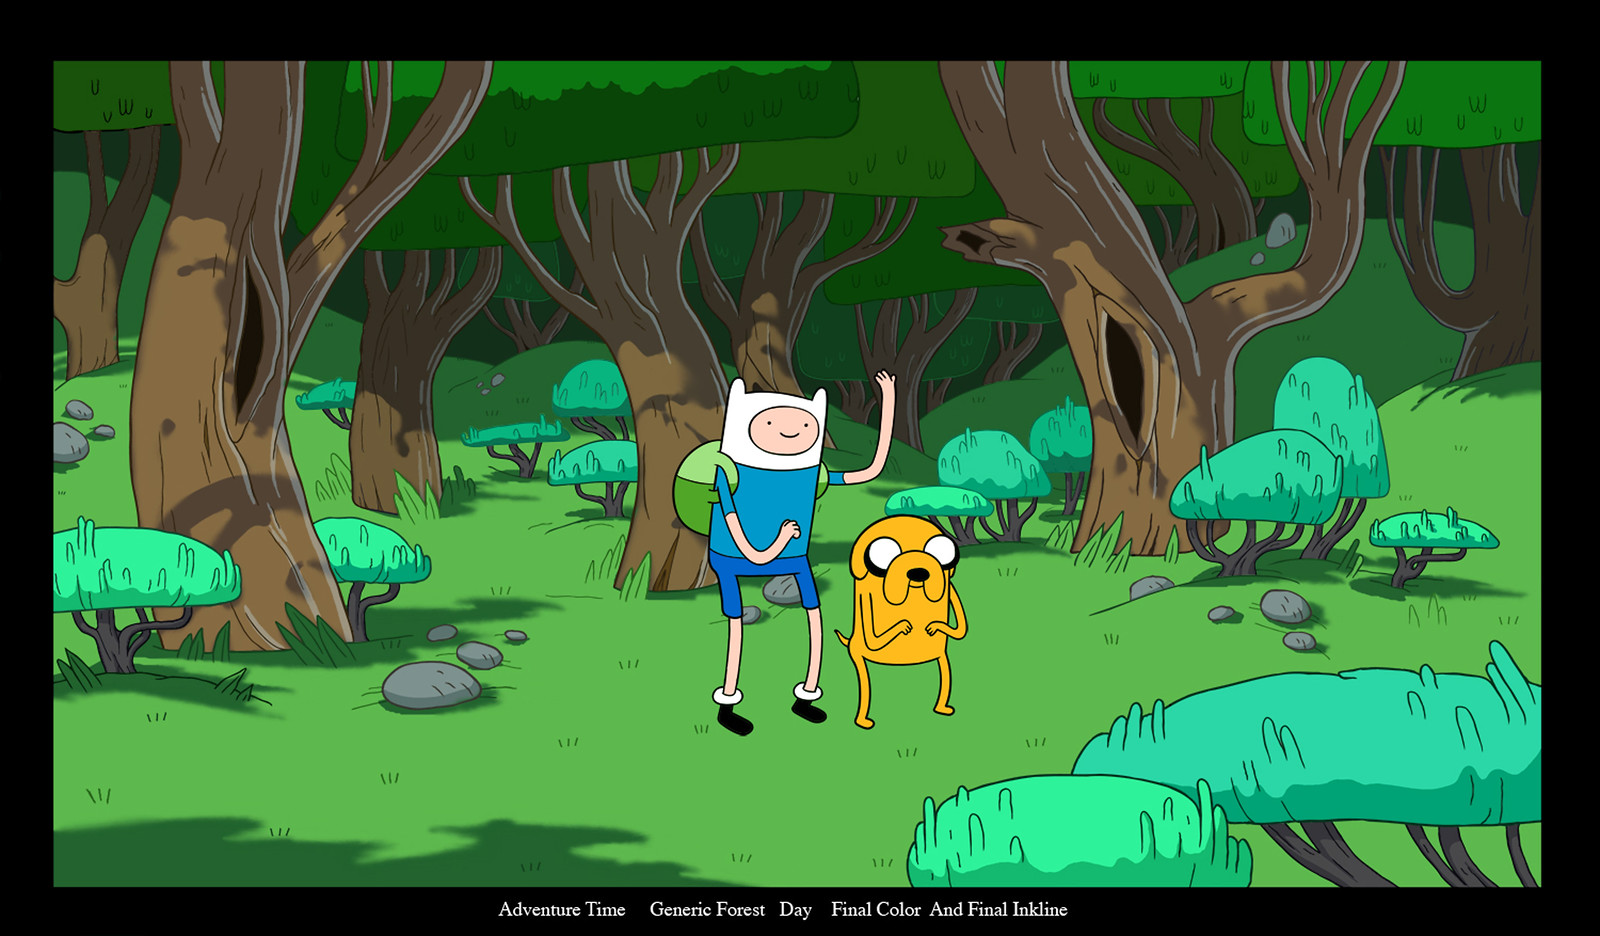 Adventure Time Backgrounds, Season One | Flickr